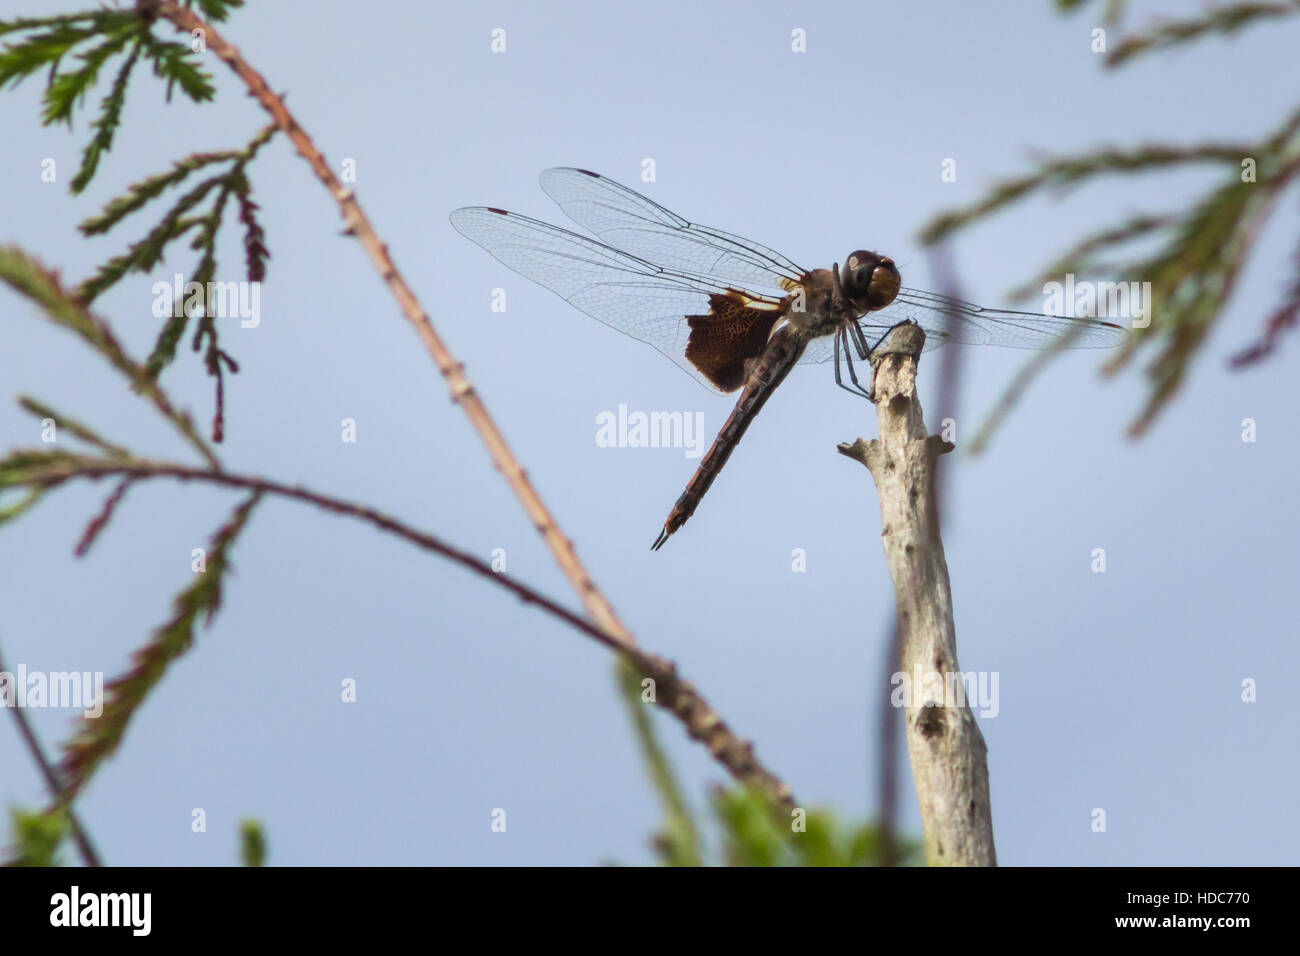 Brown dragonfly perched on a stick with a background of greenery and blue sky Stock Photo